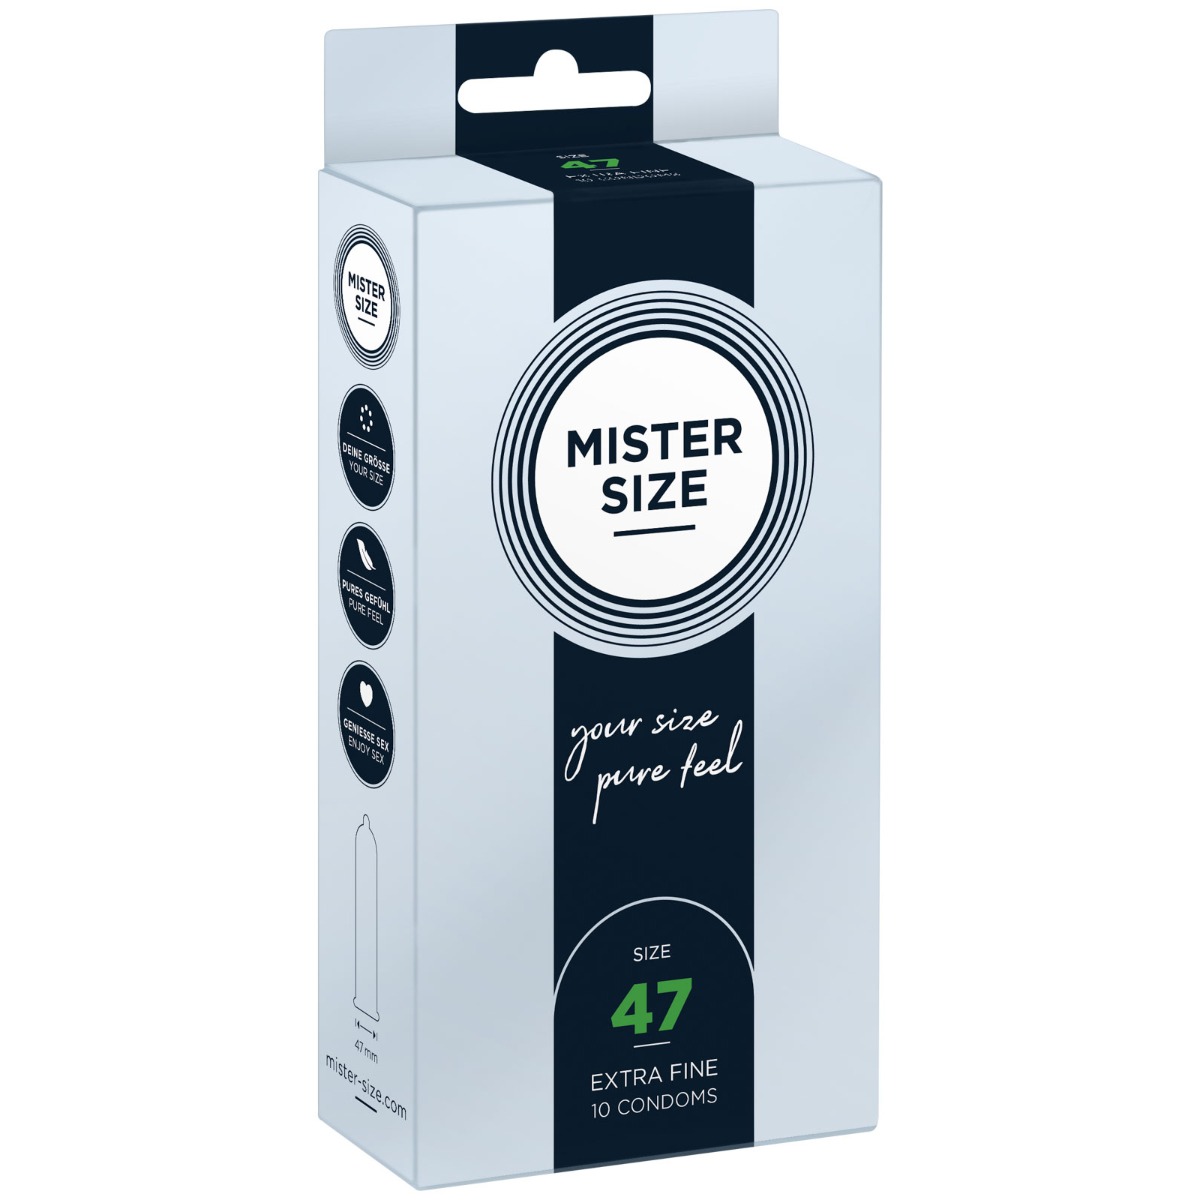 MISTER SIZE - pure feel Condoms - 47 mm (10 pack)